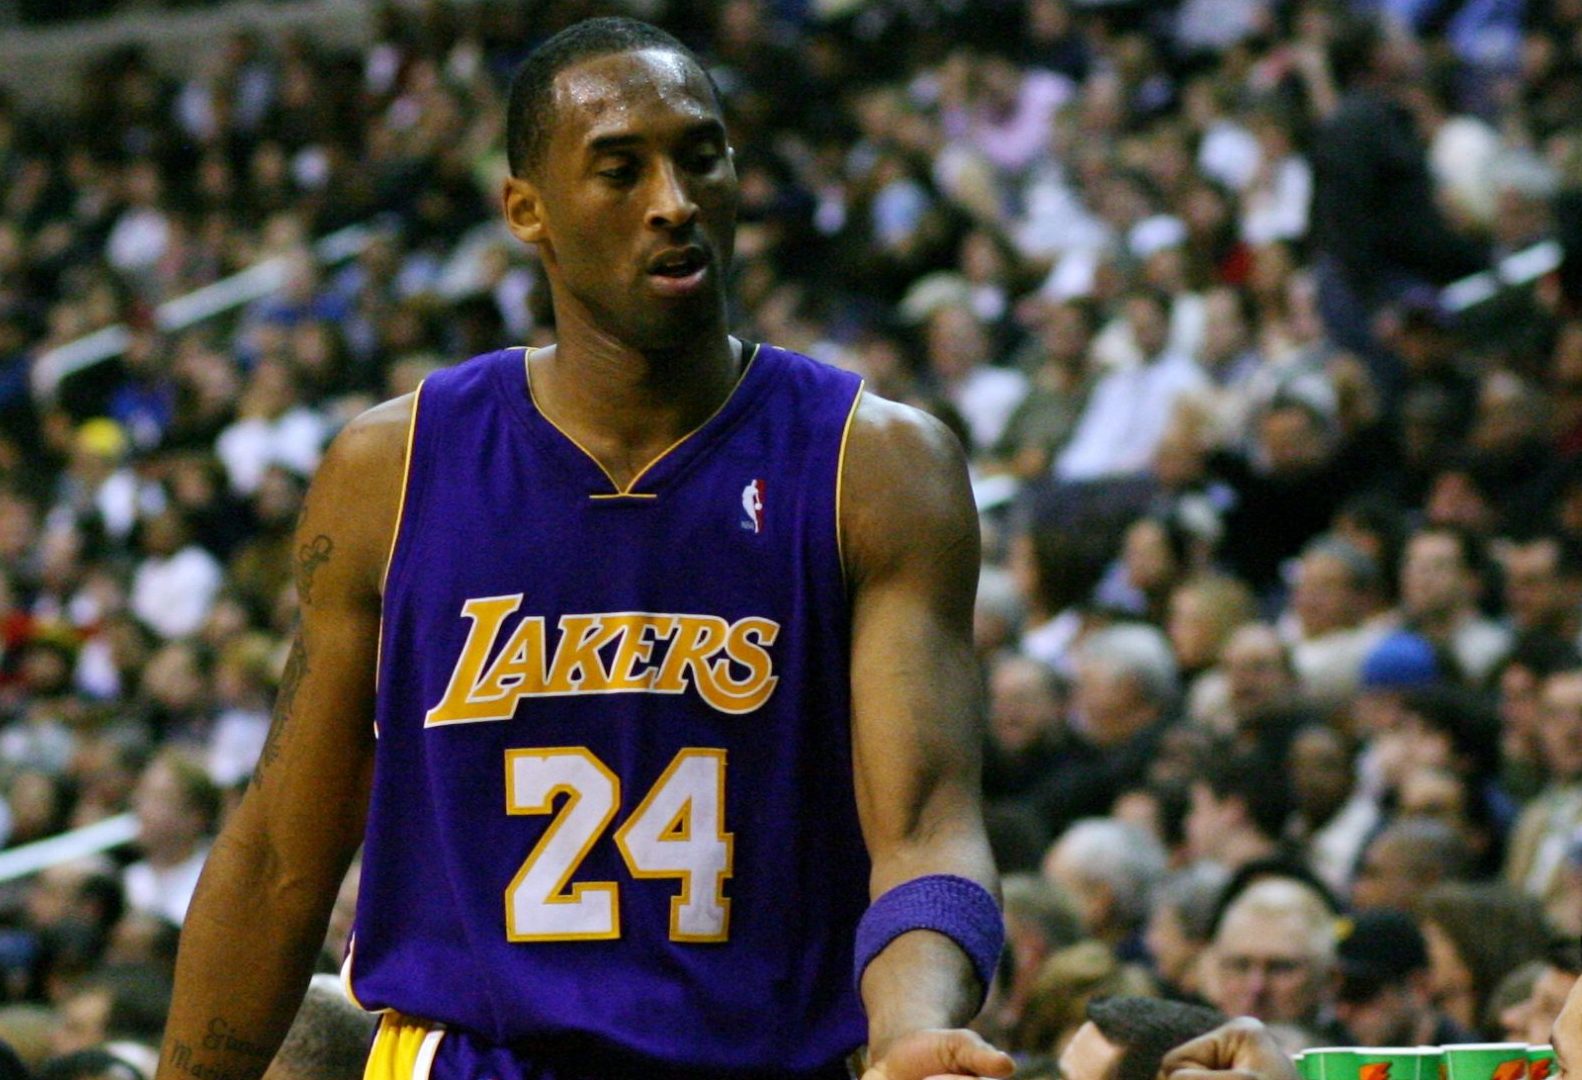 Basketball player Kobe Bryant, who died with her daughter in a helicopter crash, will be posthumously inducted into the Hall of fame basketball